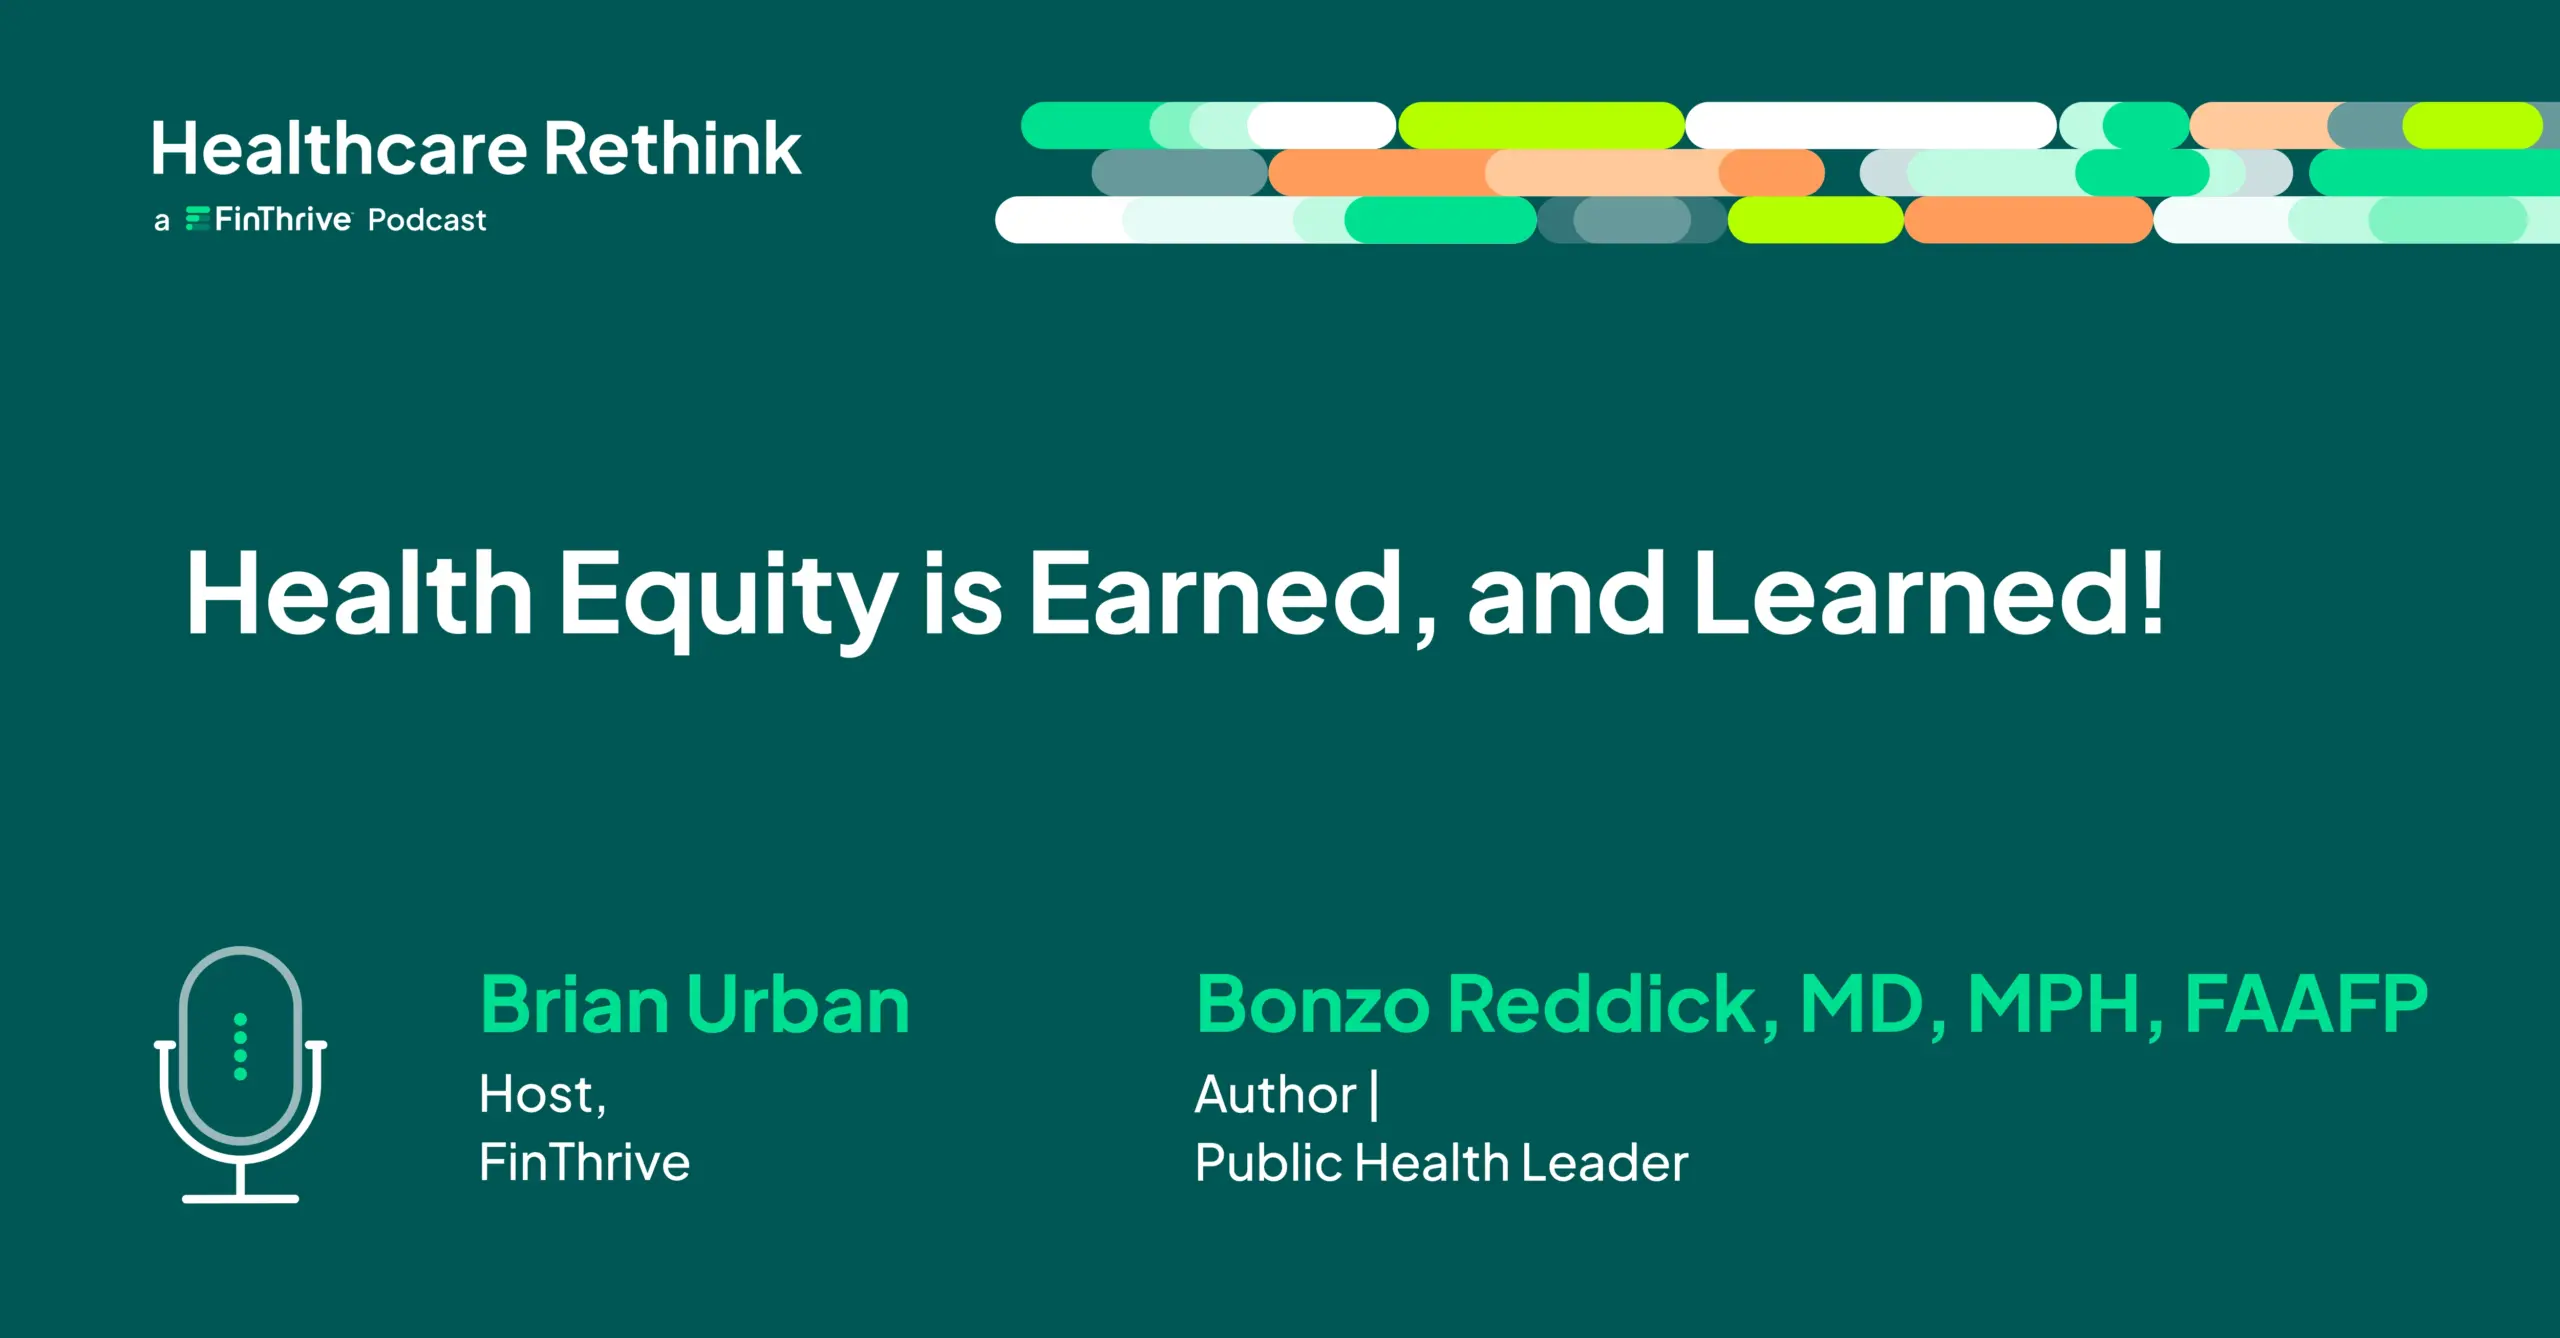 Advancing Health Equity: A Comprehensive Approach with Dr. Bonzo Reddick